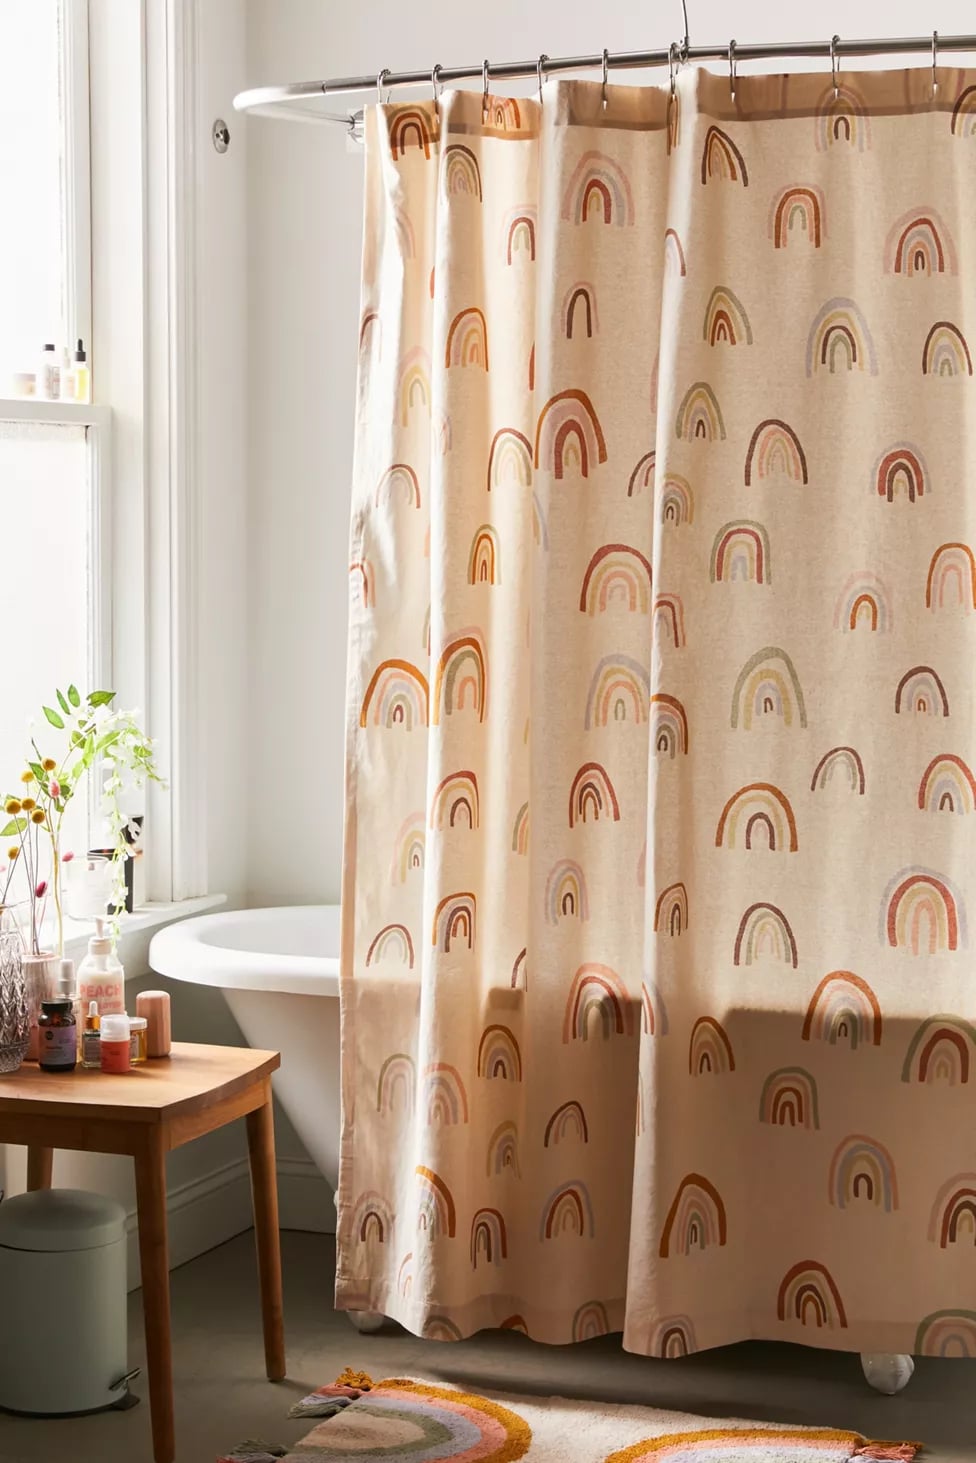 Details about   New URBAN OUTFITTERS Famous Home Fashions Floral Print Shower Curtain 70 x 72 